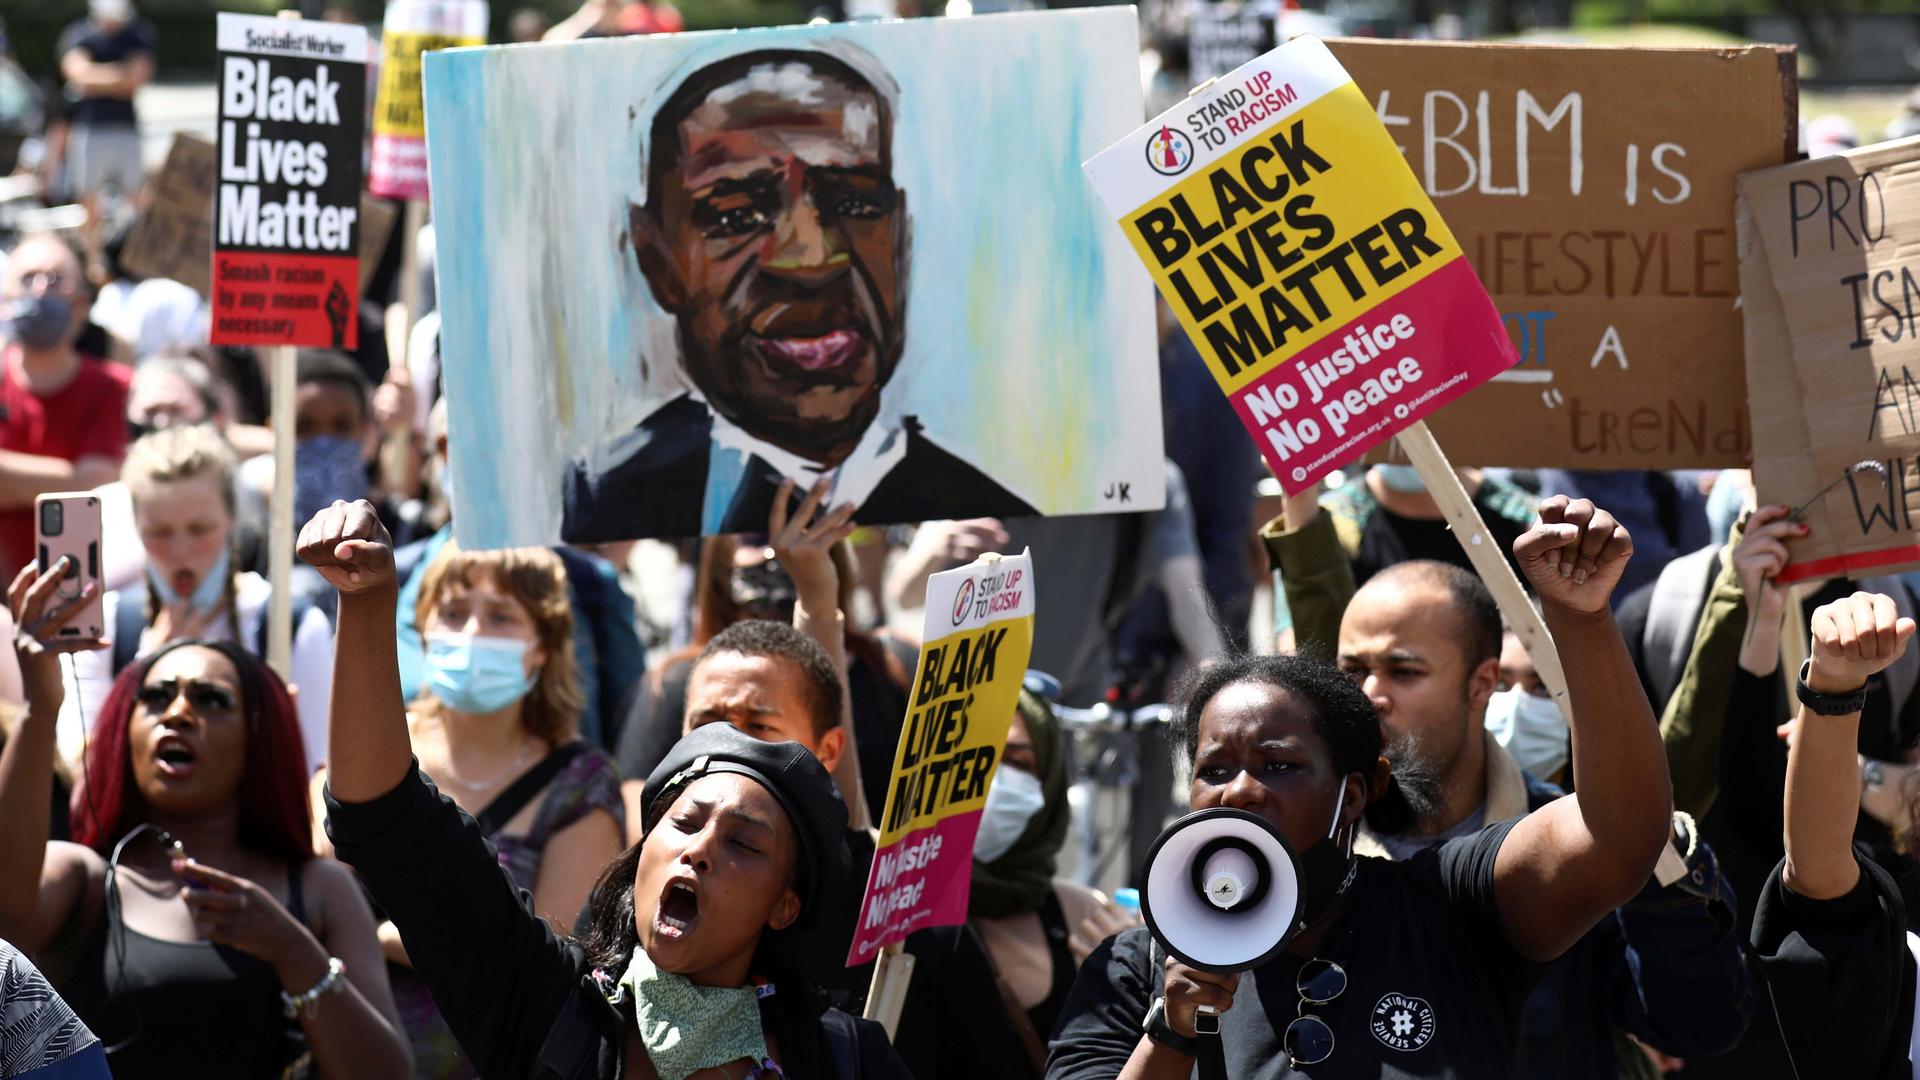 Demonstrators gesture and shout during a Black Lives Matter protest following the death of George Floyd in Minneapolis police custody, in London, Britain, June 13, 2020.